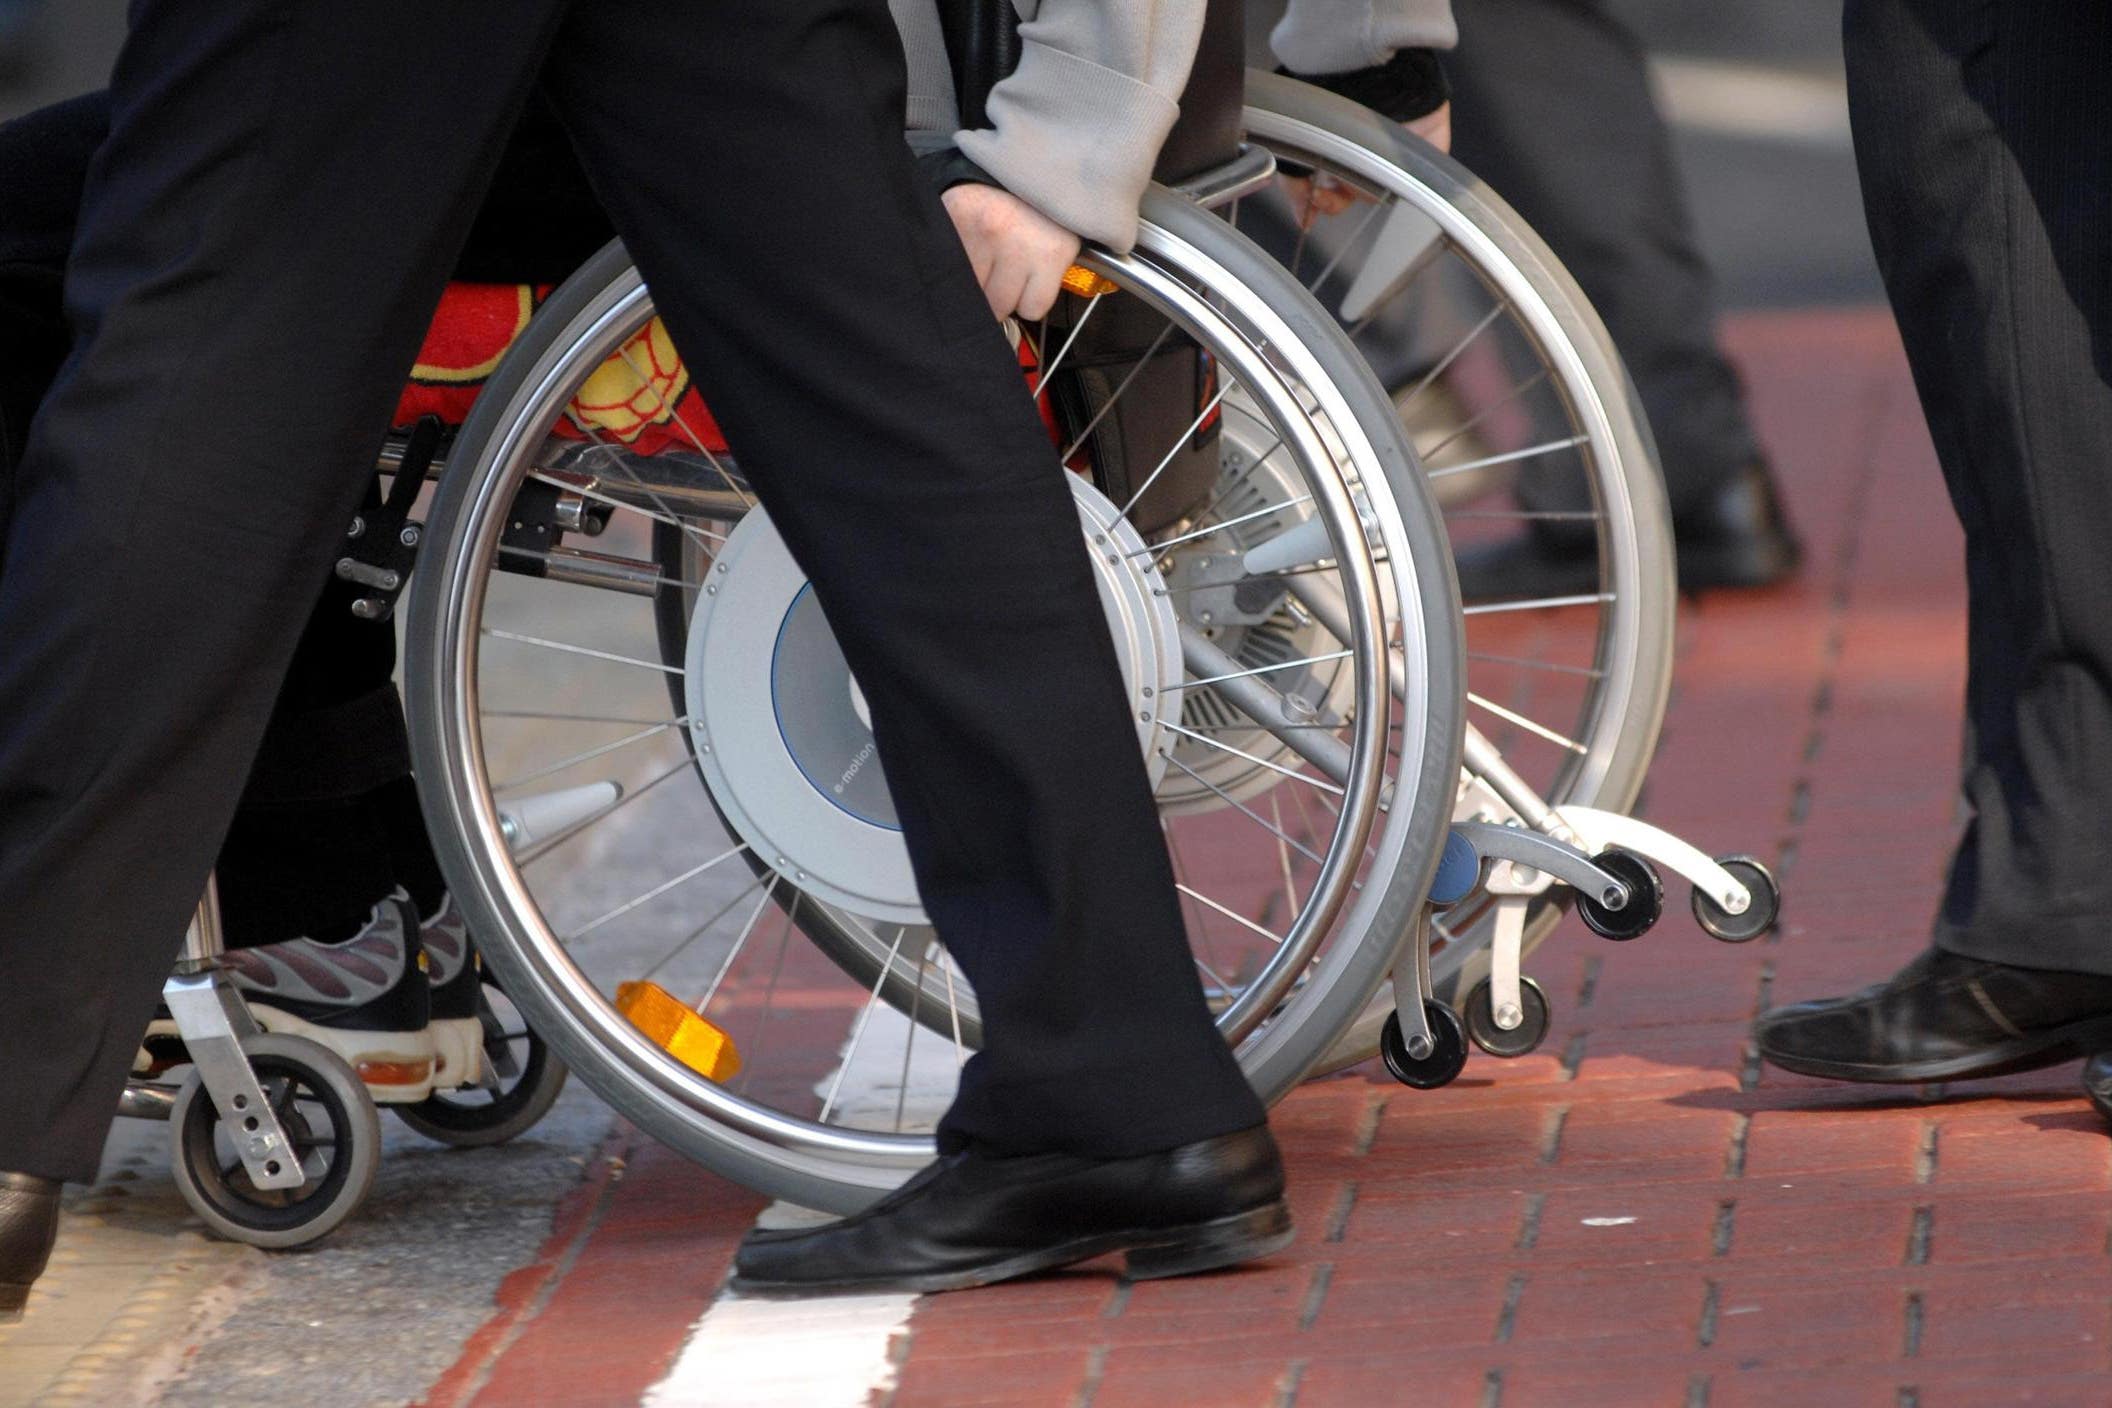 The equalities watchdog is investigating the government’s treatment of disabled people